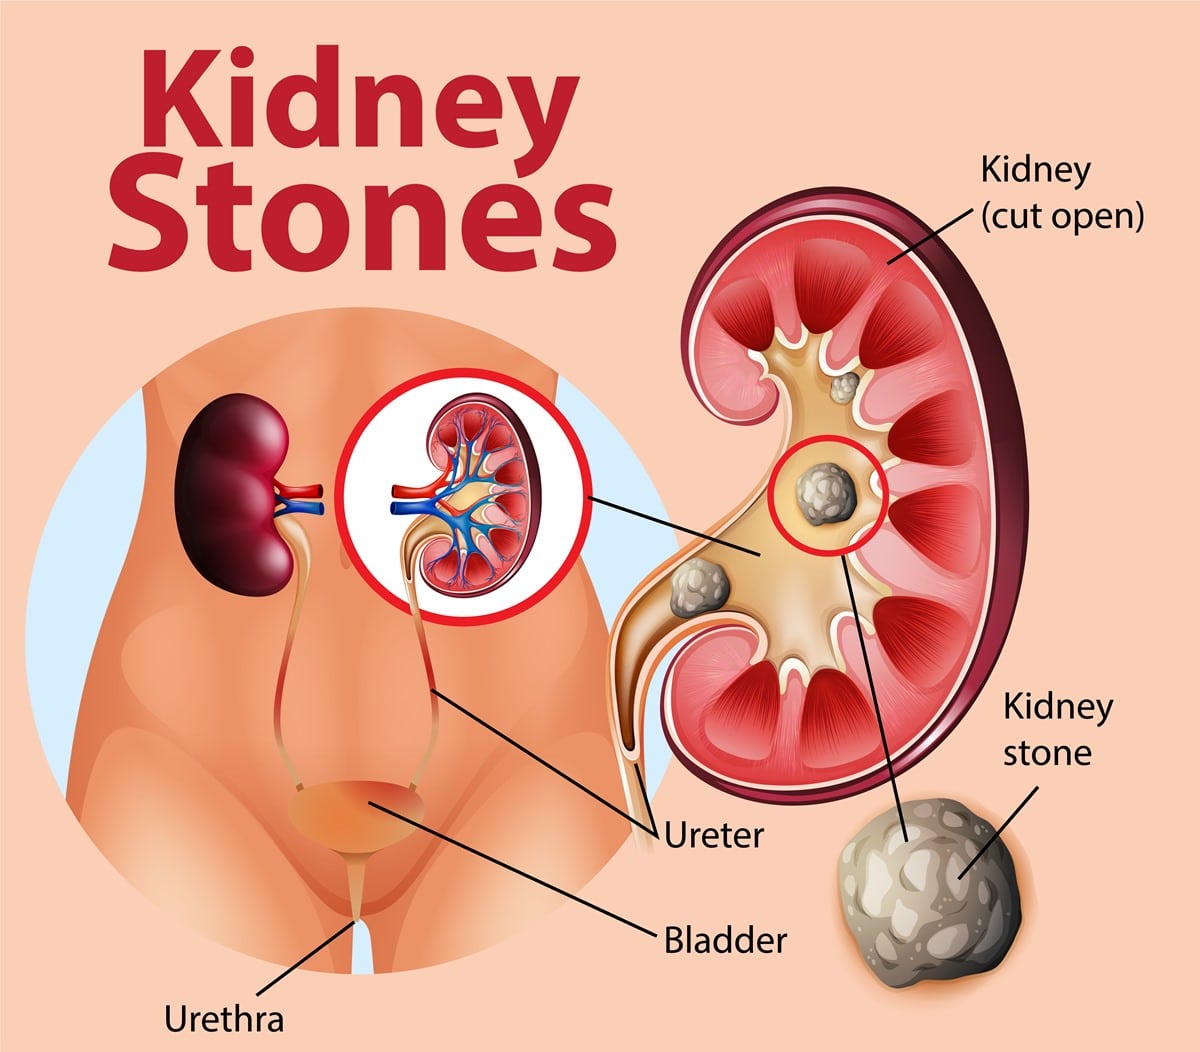 Kidney Stones: What Do You Need To Know?